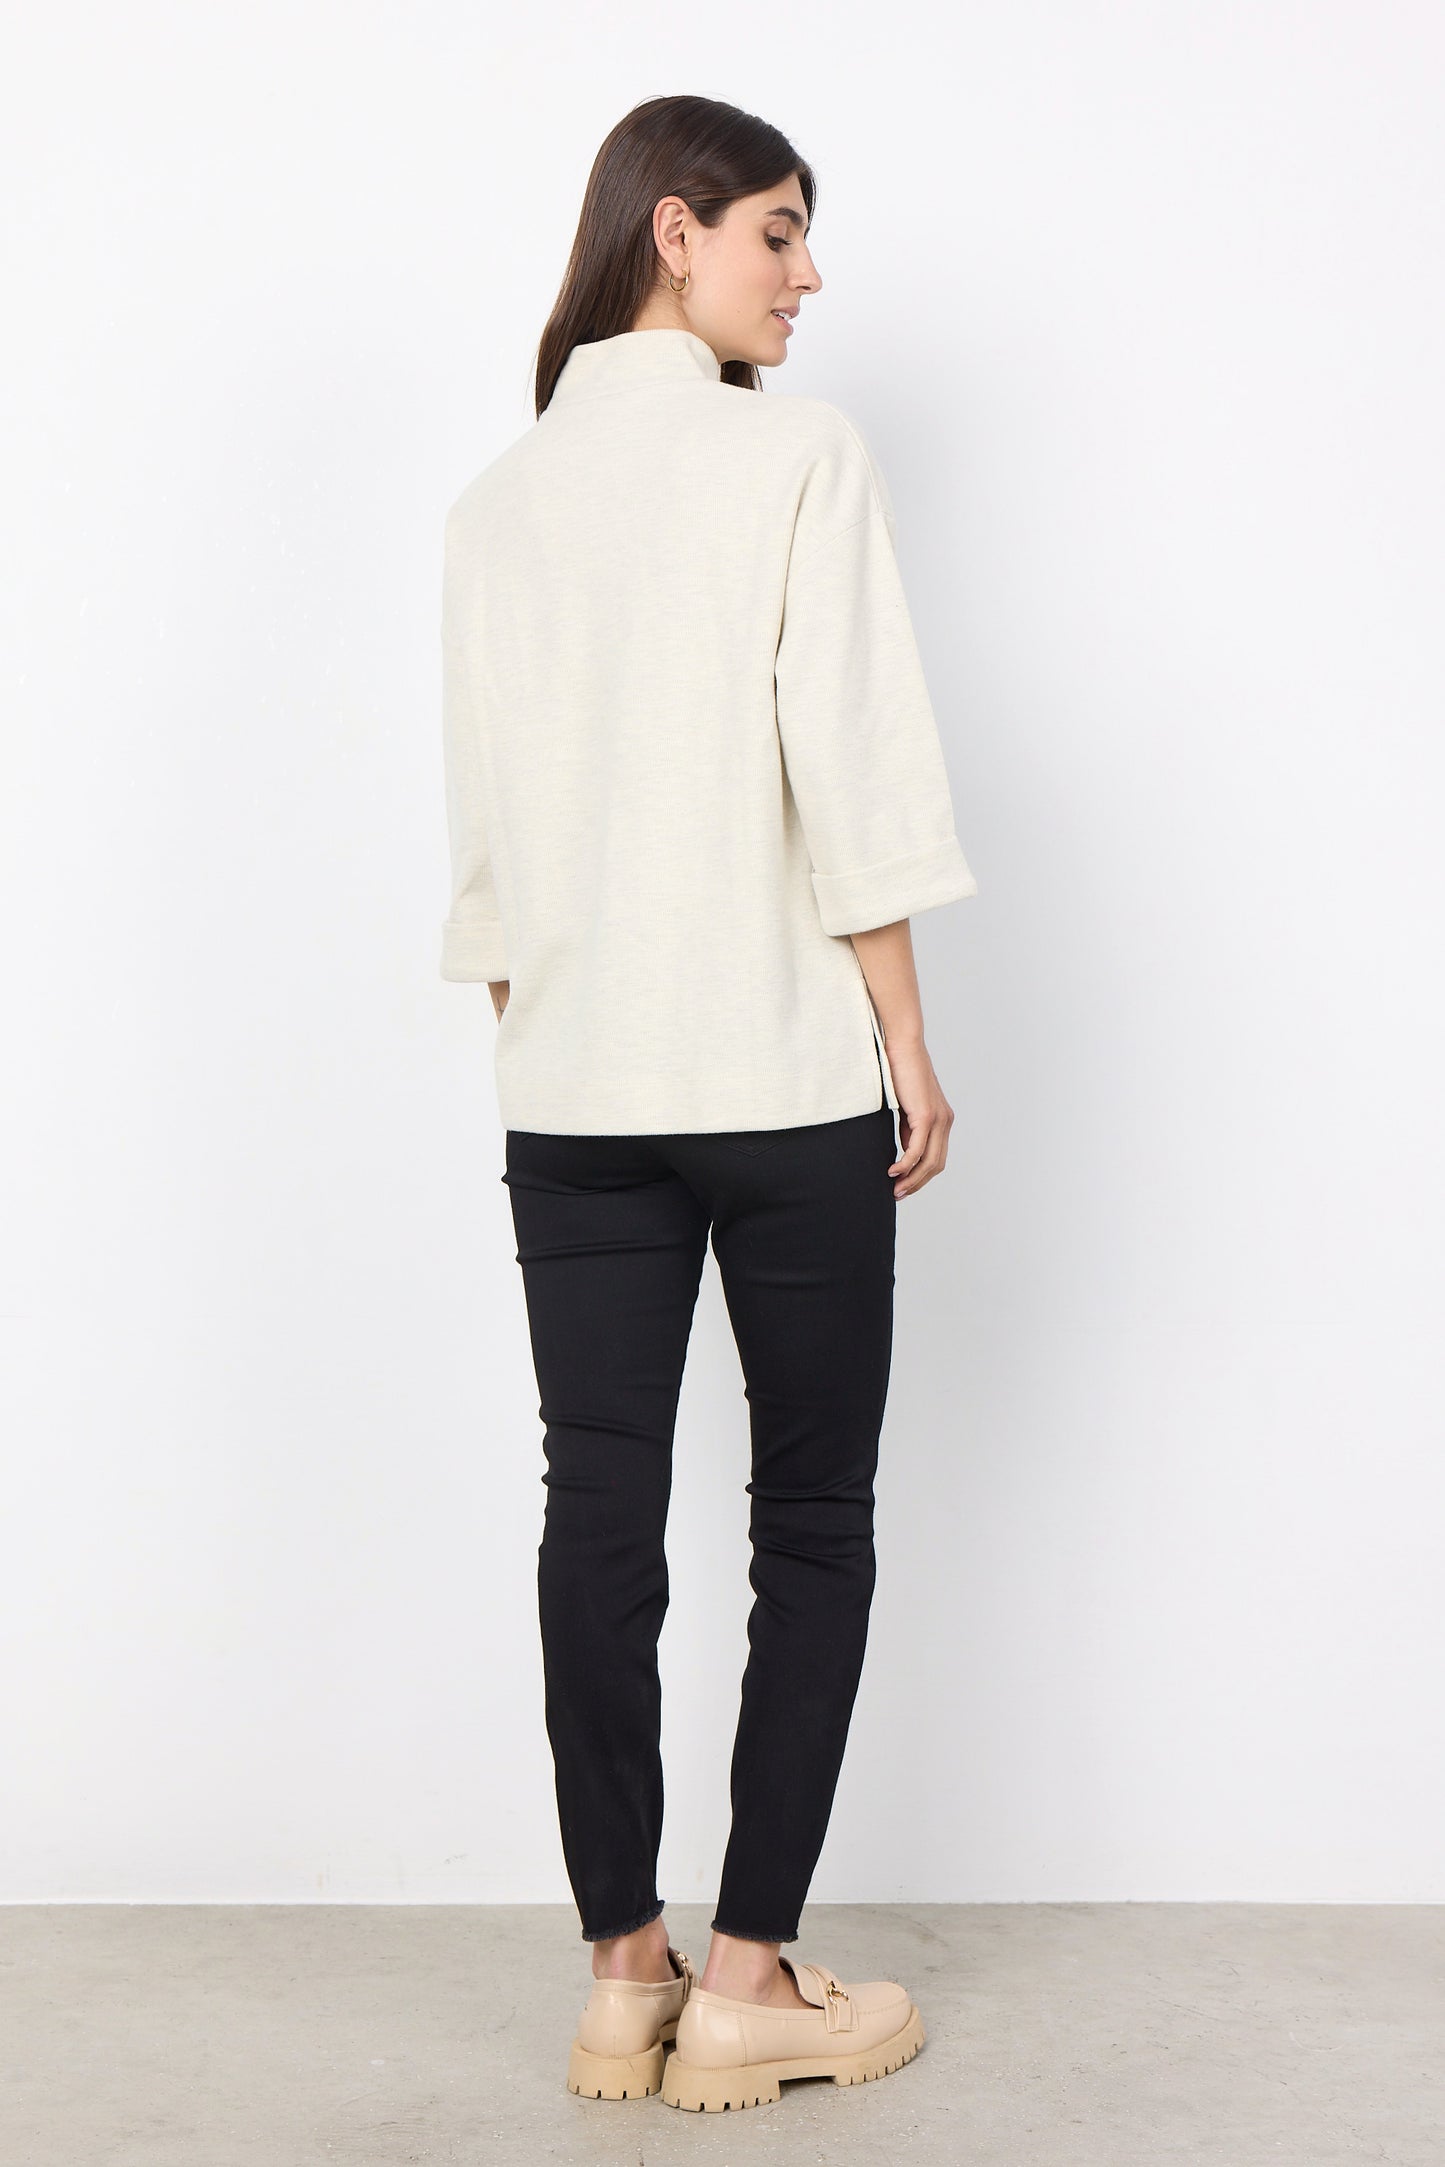 Soya Concept Ally 2 Blouse In Cream